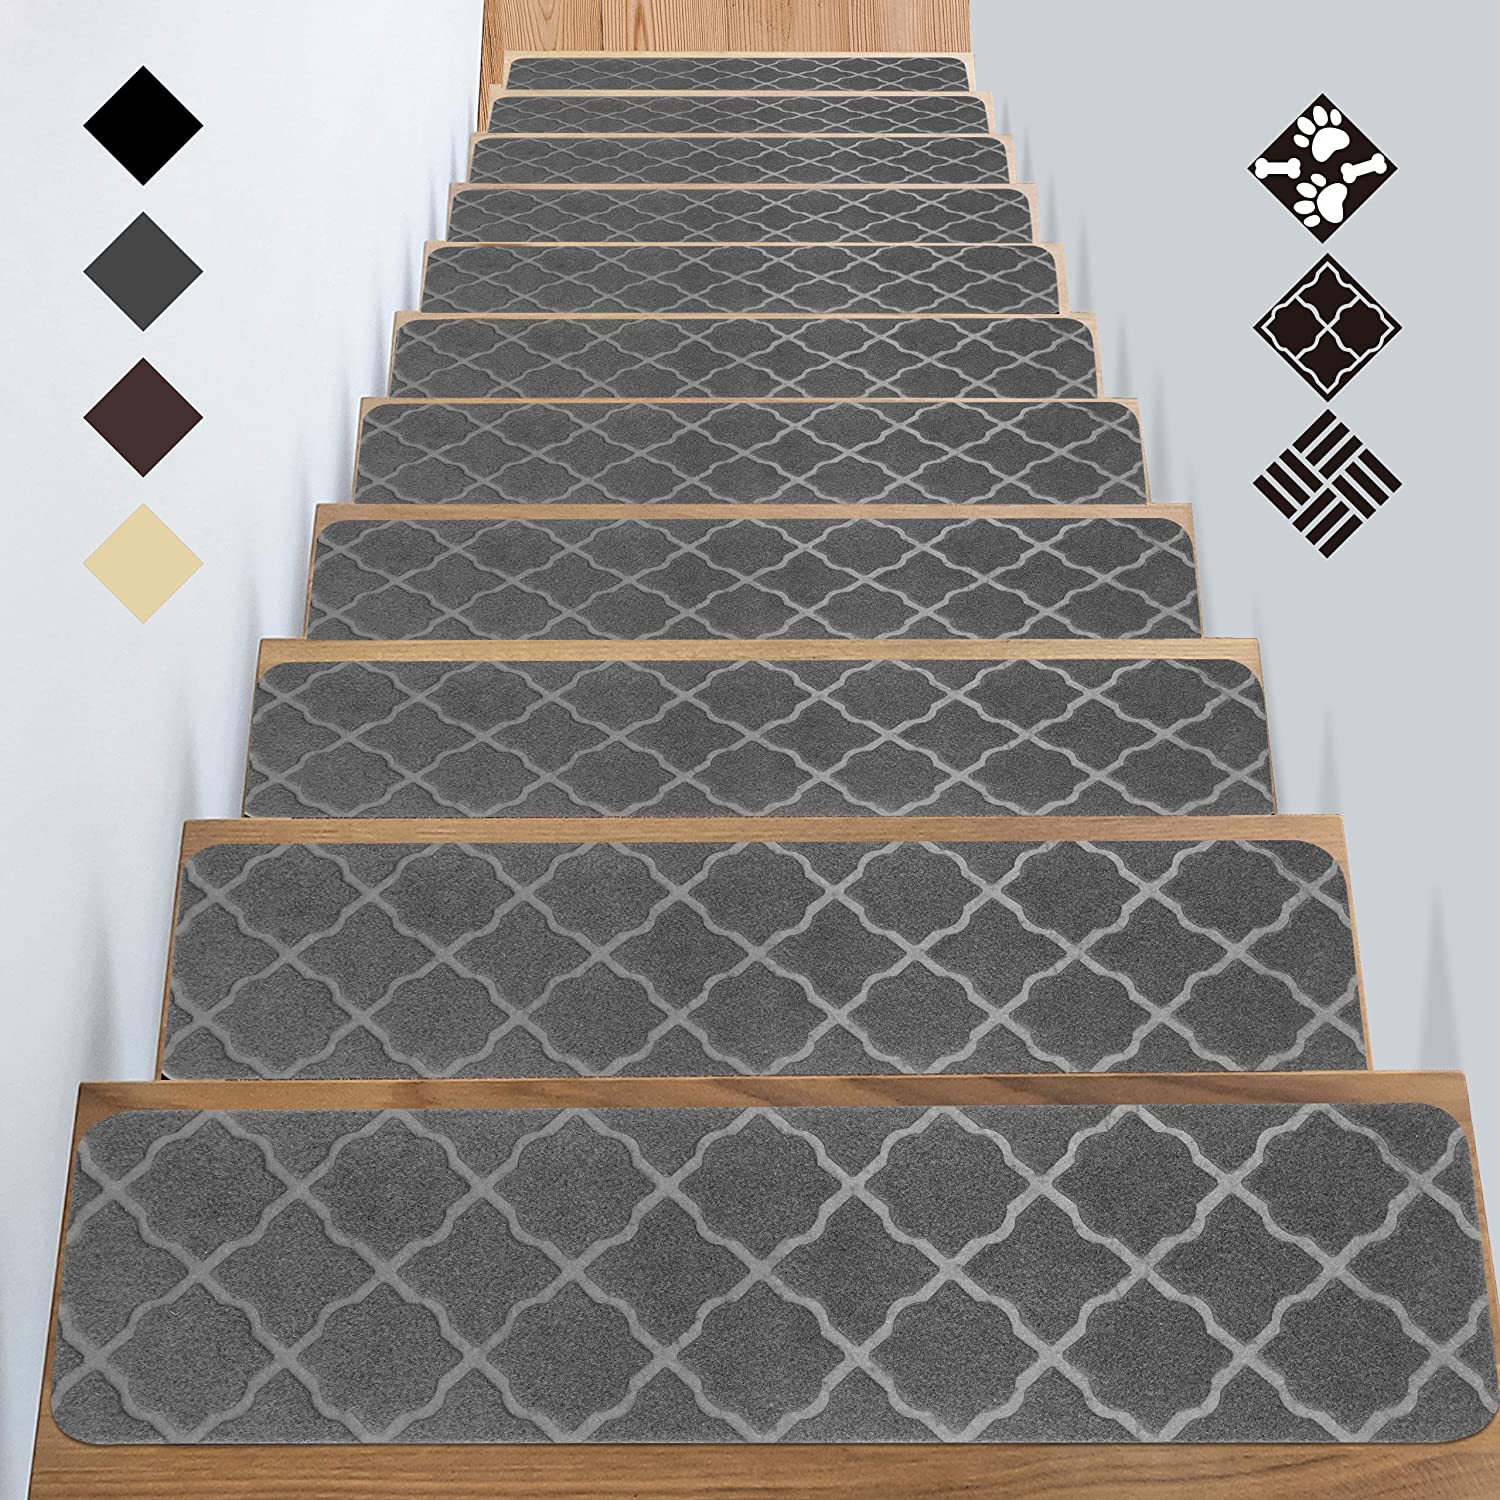 Stair Treads for Wooden Steps - Non Slip Stairs Carpet [...]